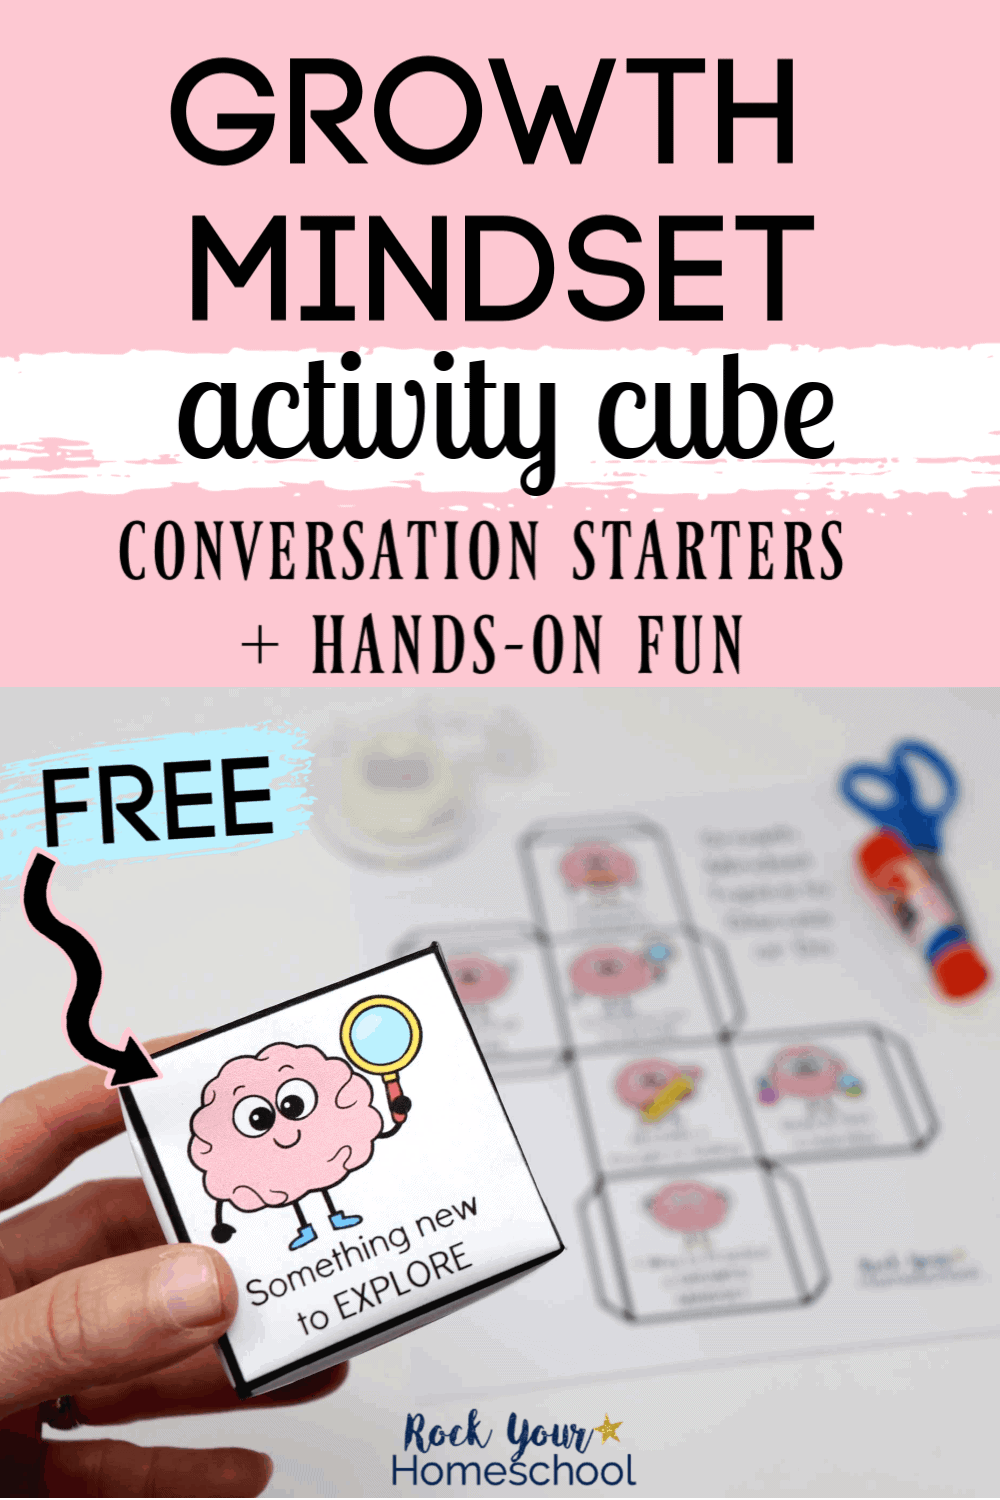 Fun Way to Spark Growth Mindset for Kids Conversations